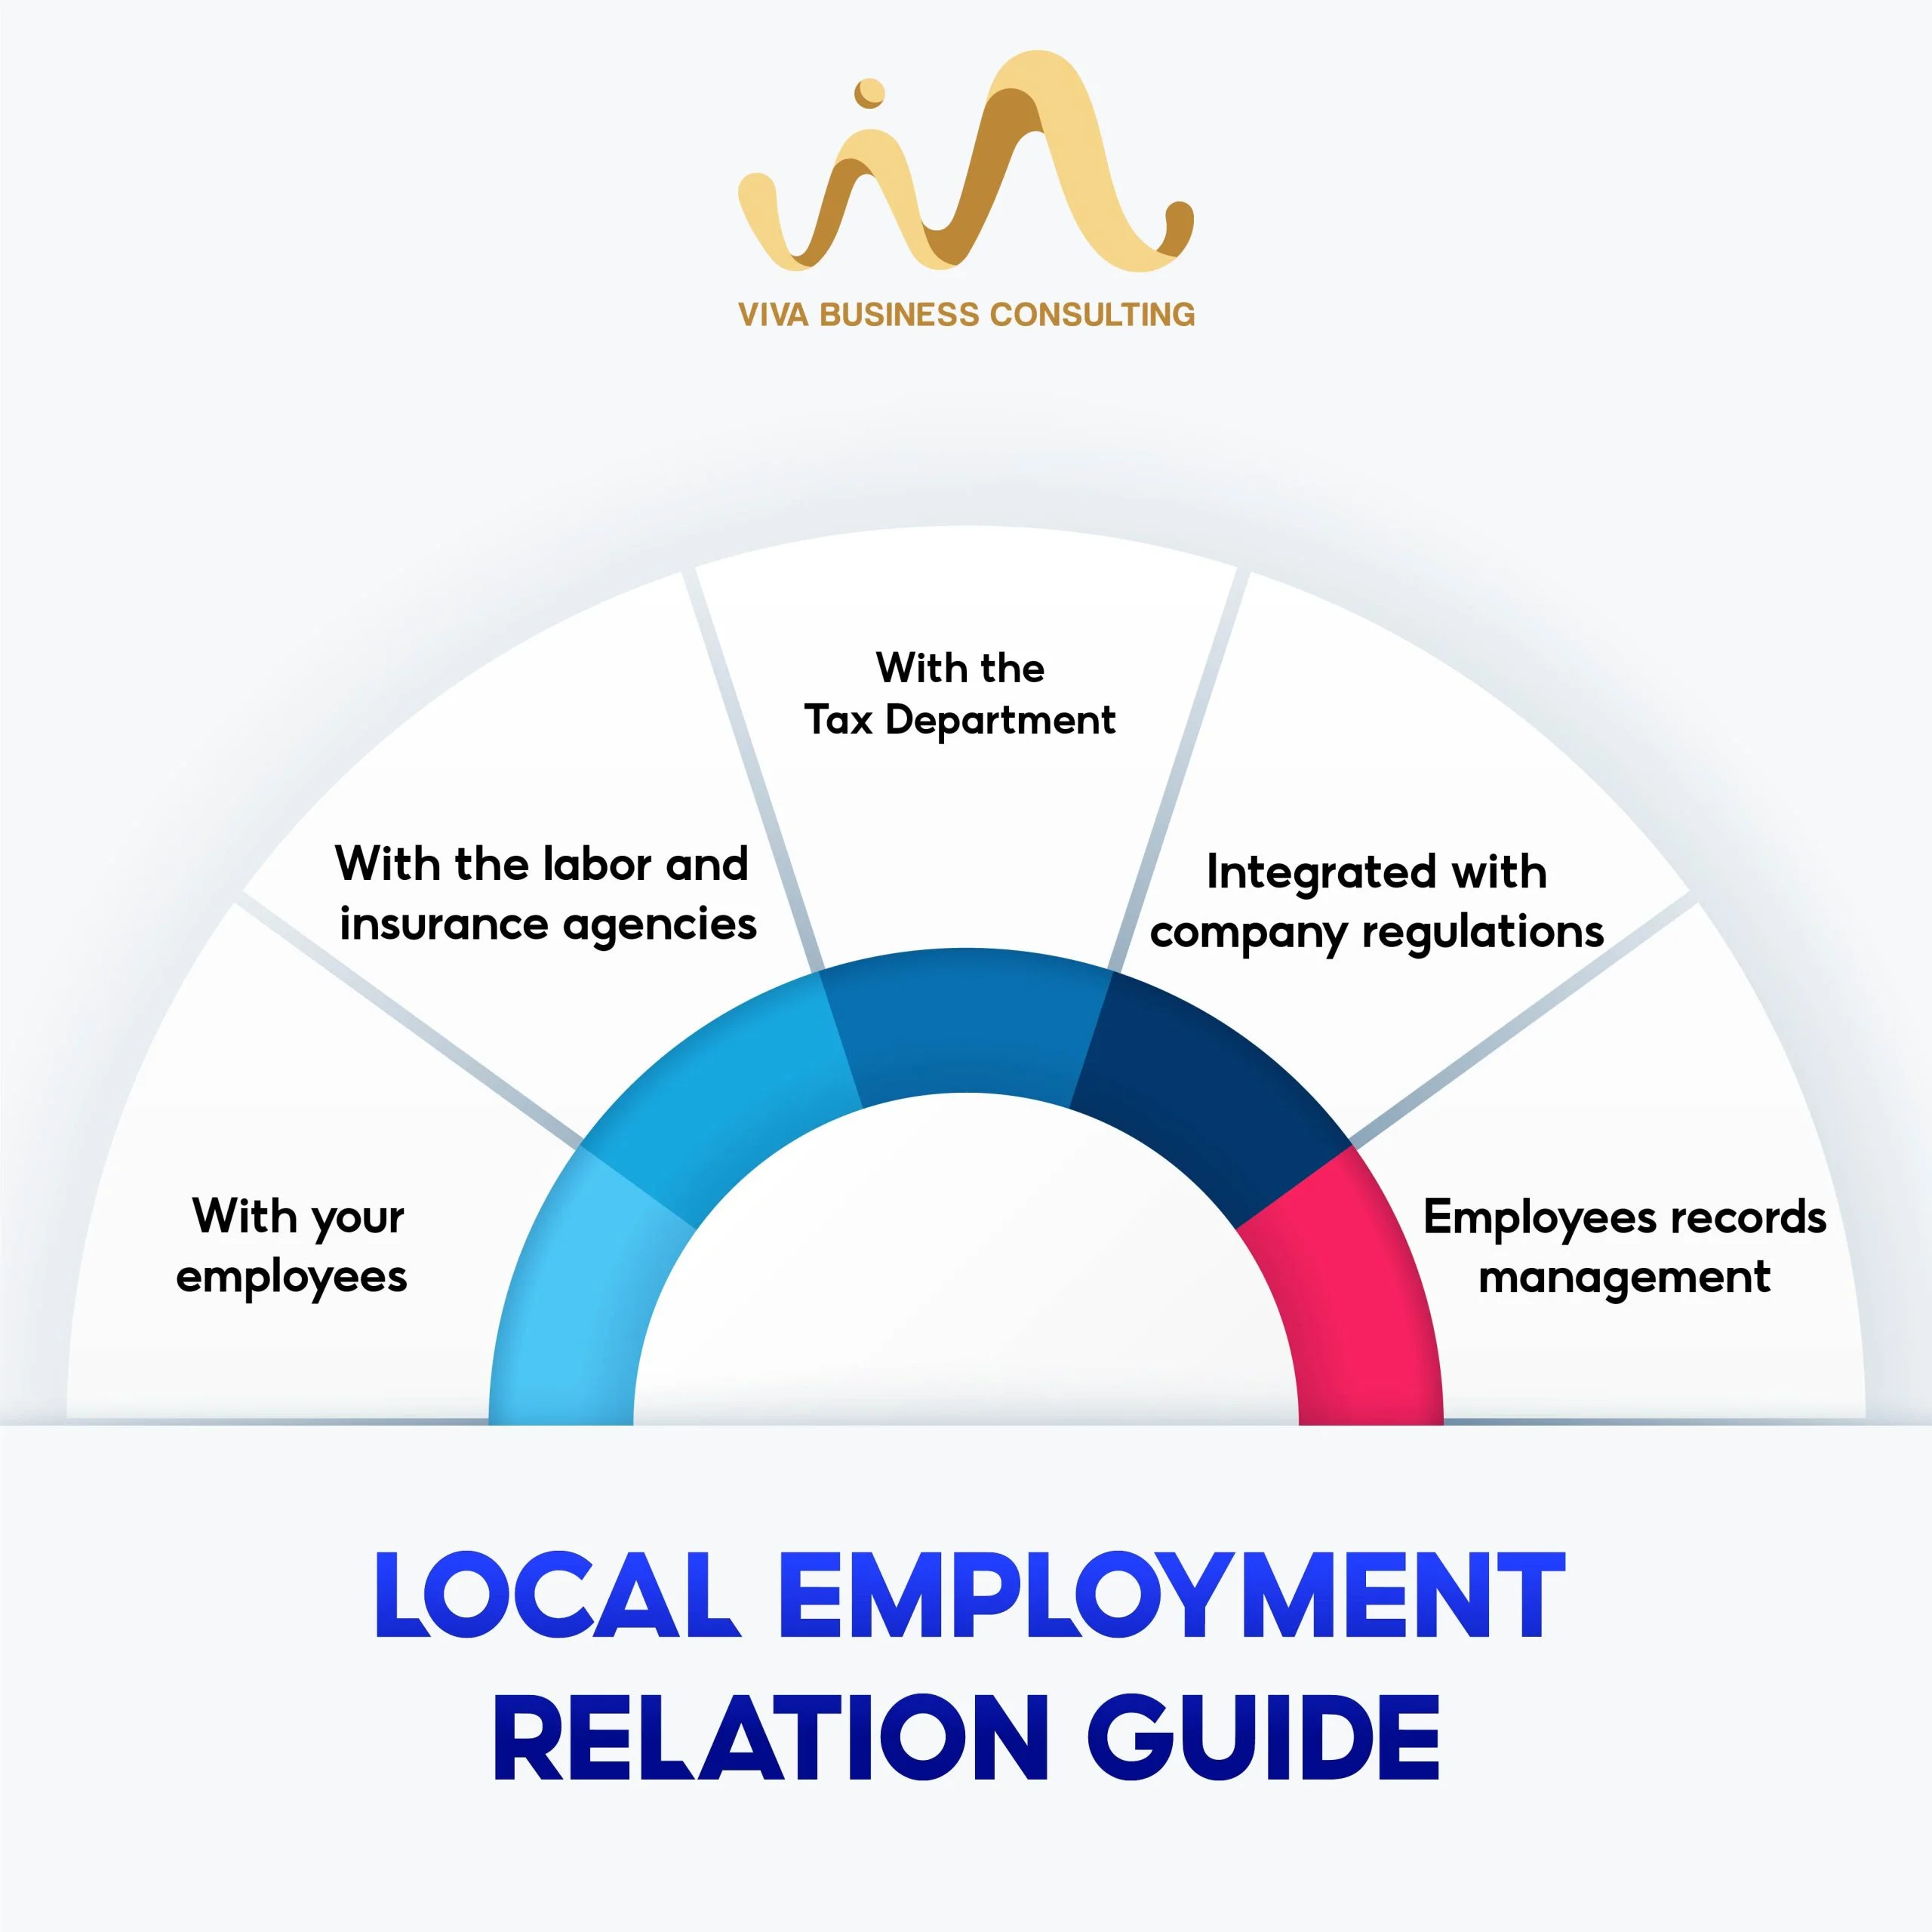 Local employment relation guide